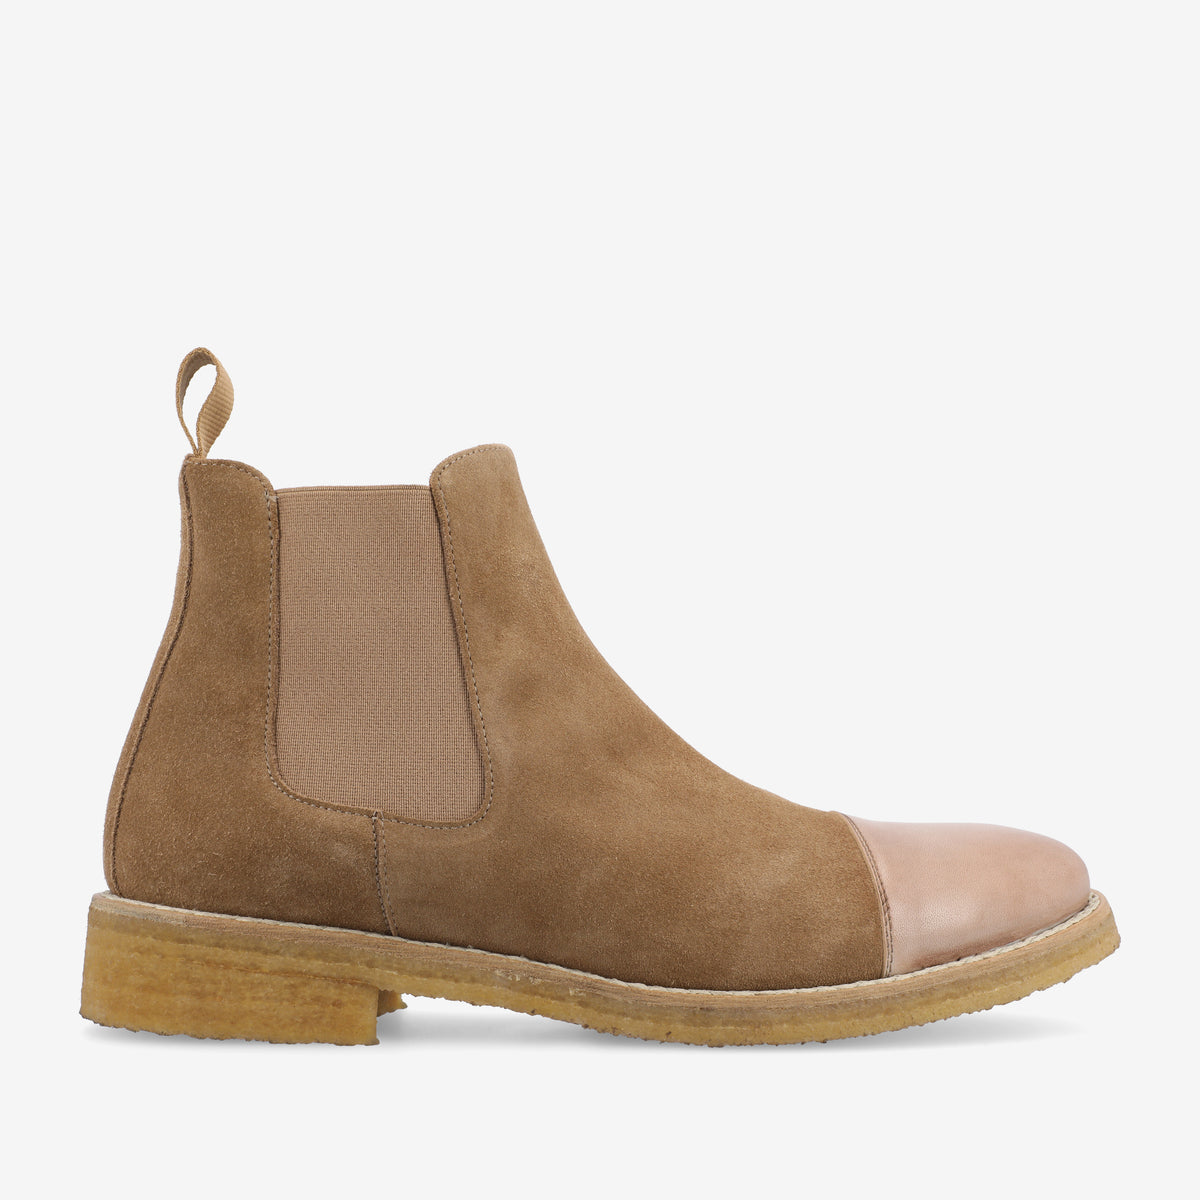 The Outback Boot in Ochre